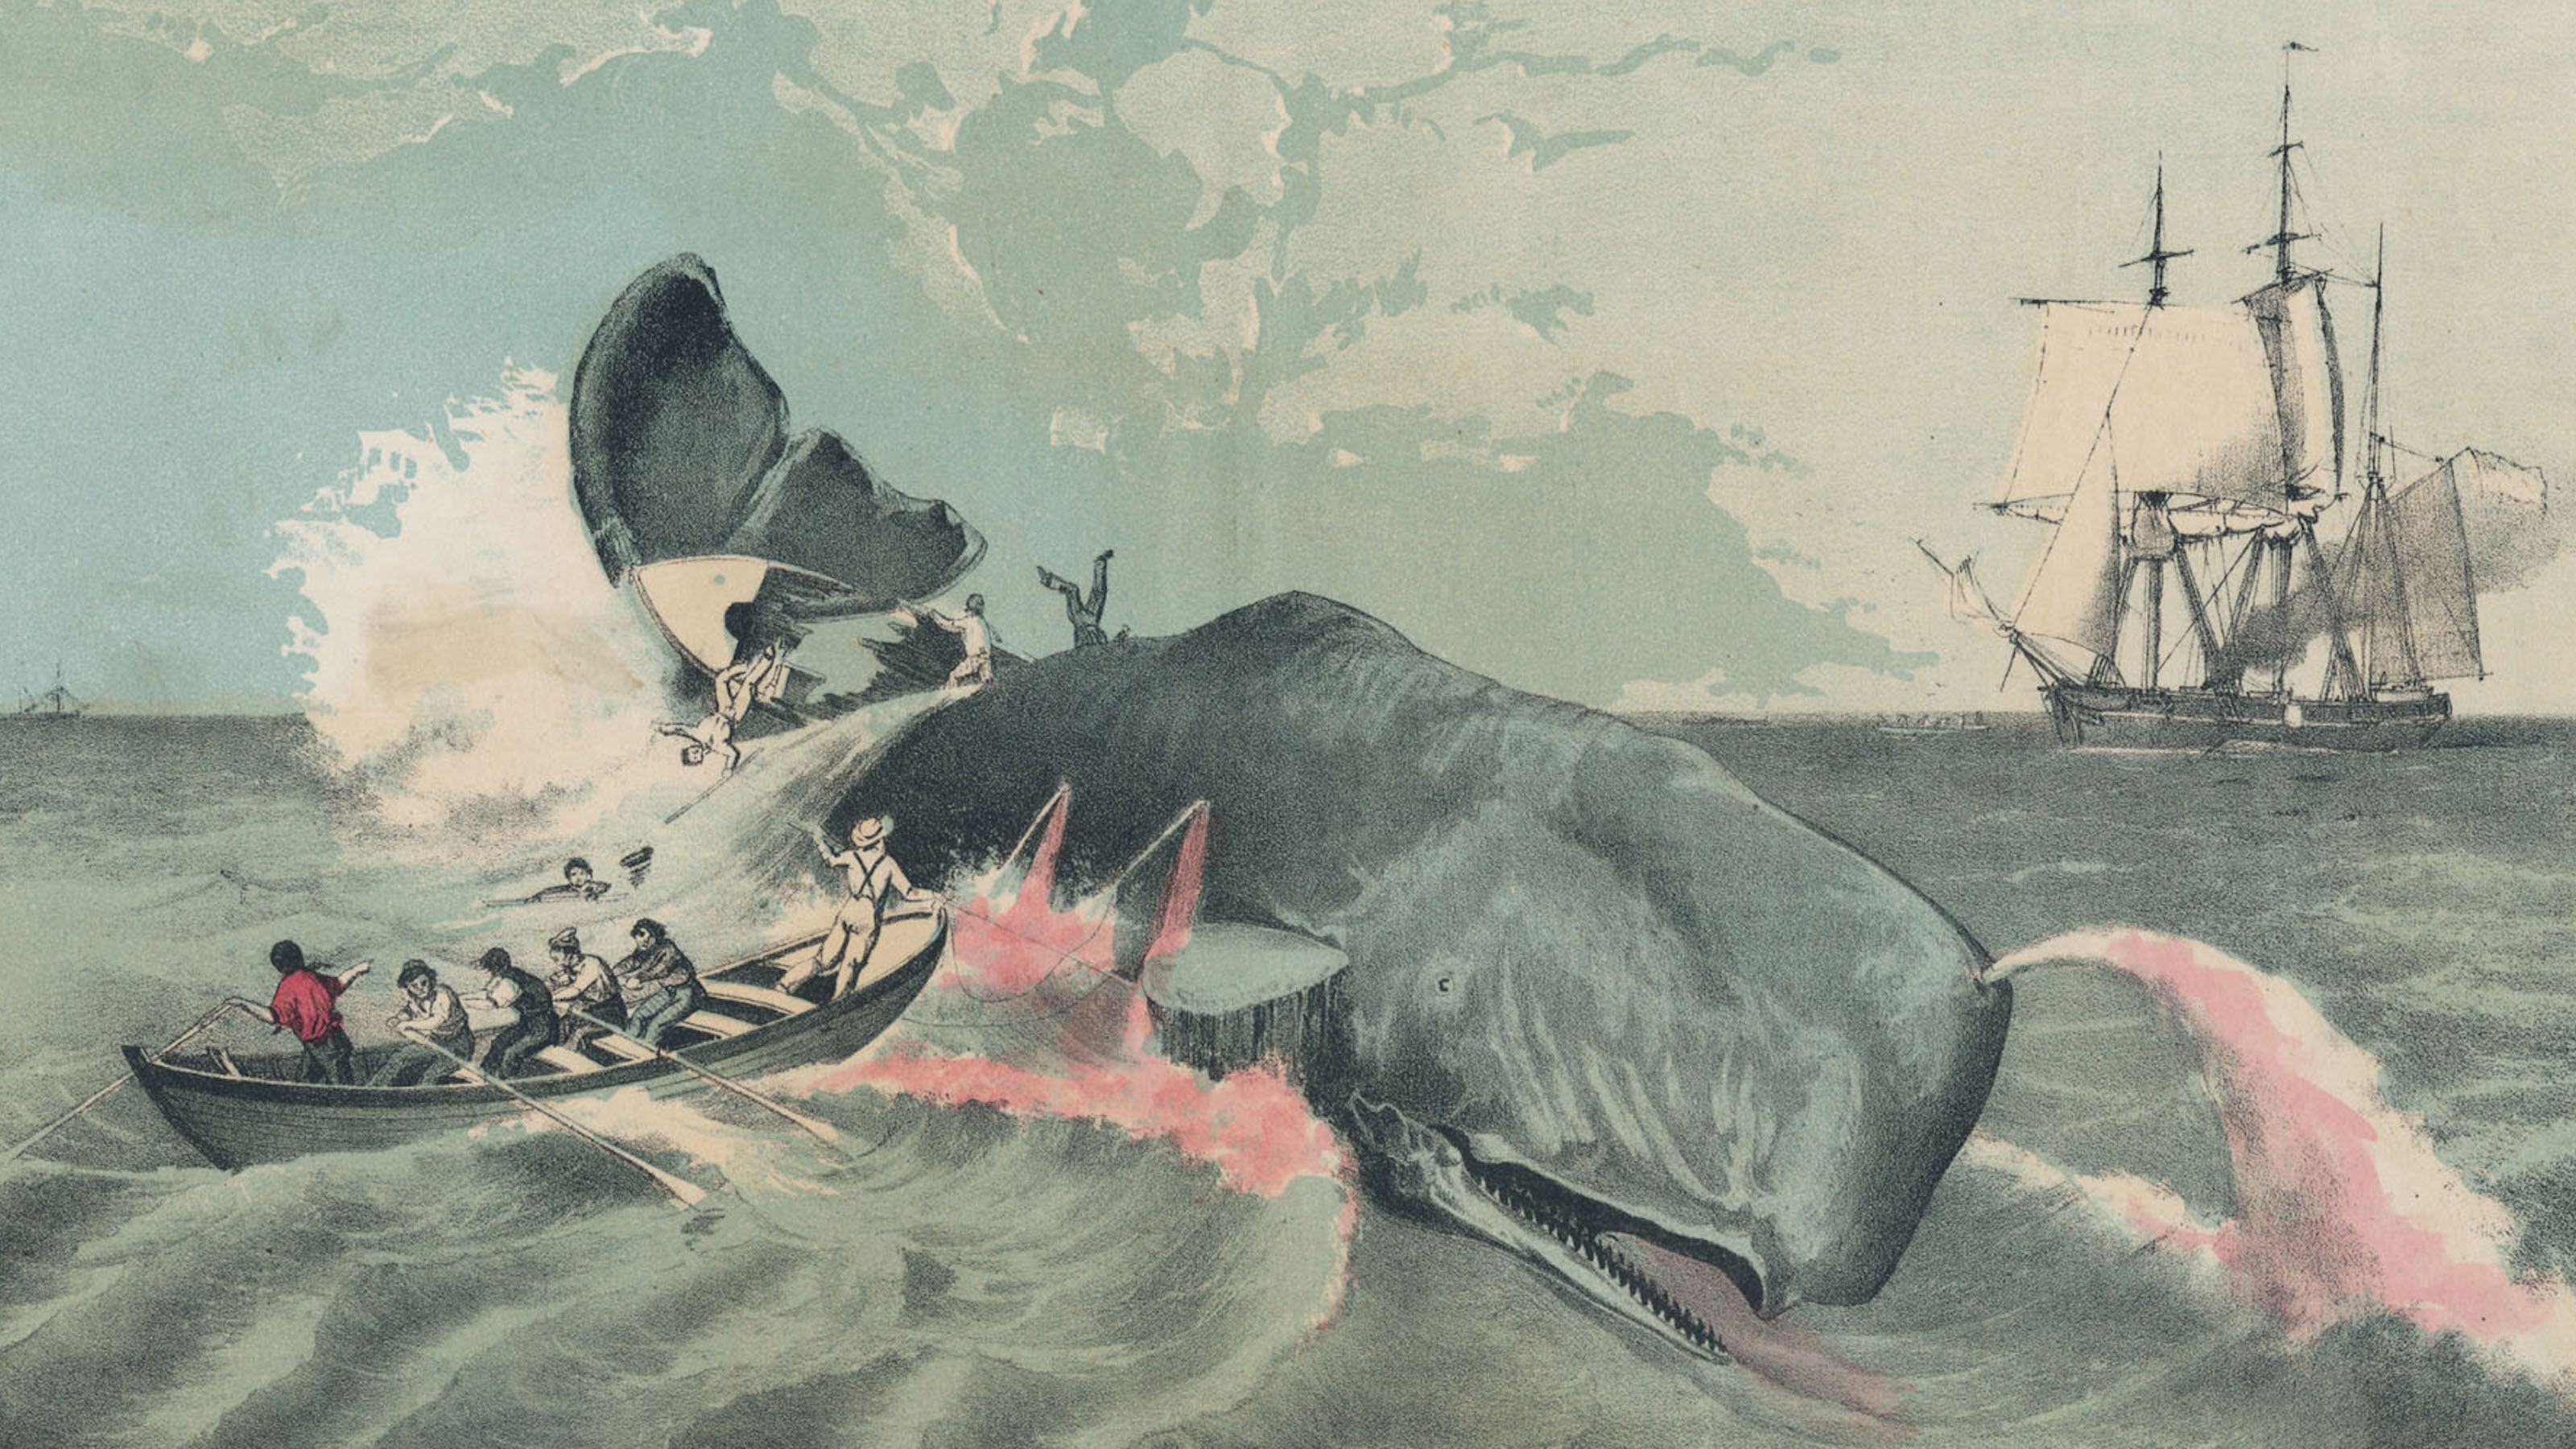 A whaling scene depicting a harpooned whale bleeding near a small rowing boat with sailors, with a sailing ship in the background.